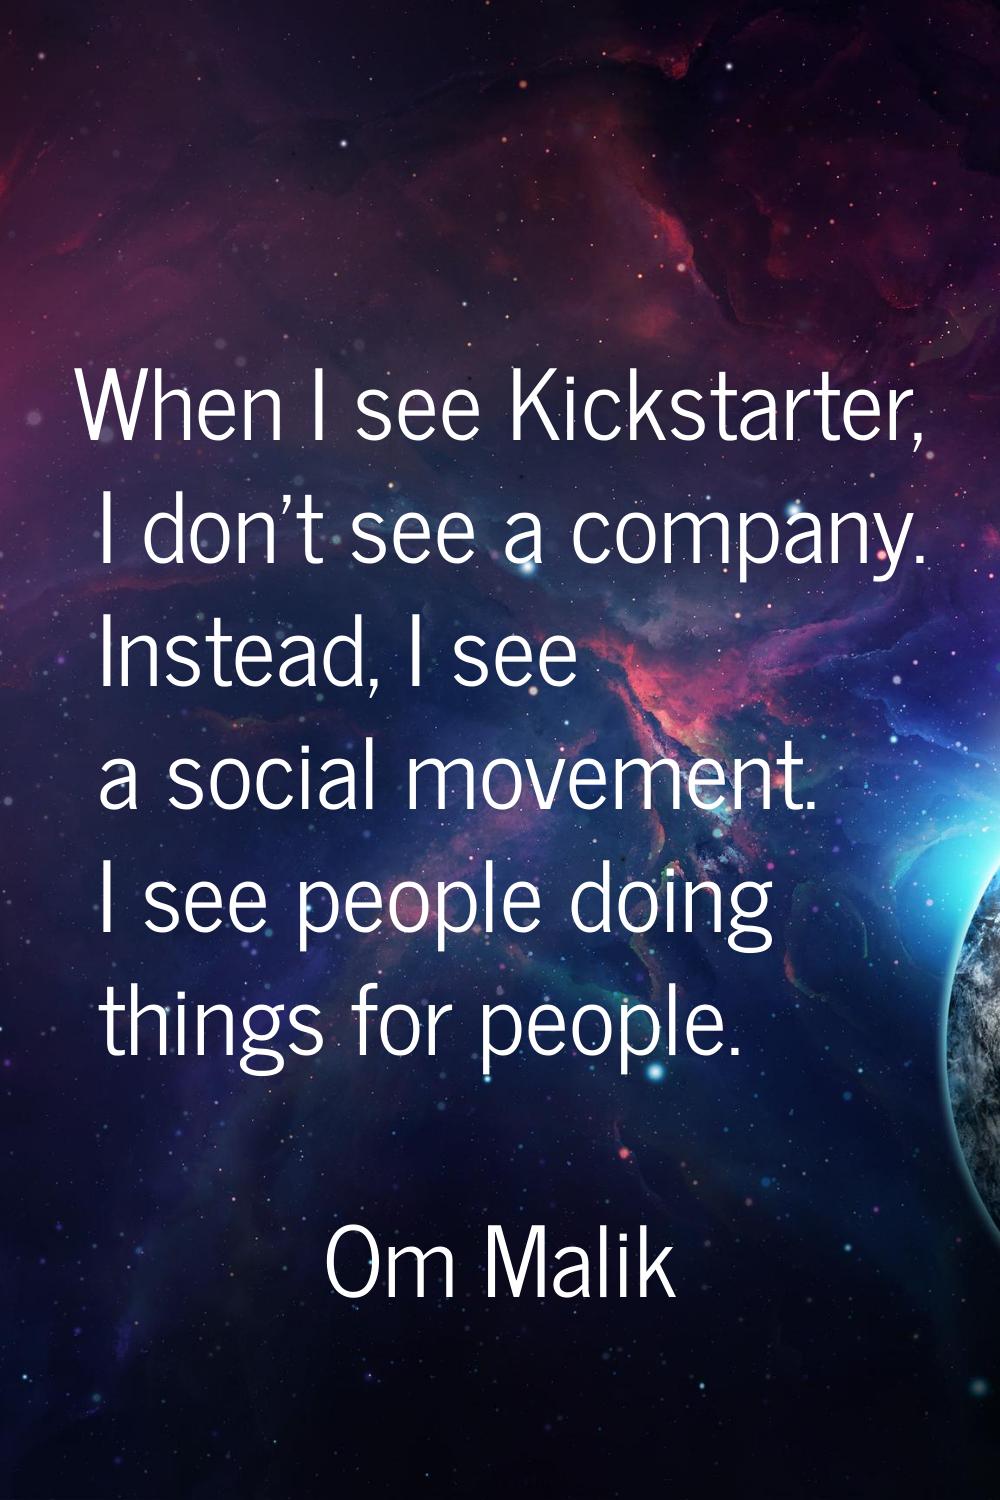 When I see Kickstarter, I don't see a company. Instead, I see a social movement. I see people doing